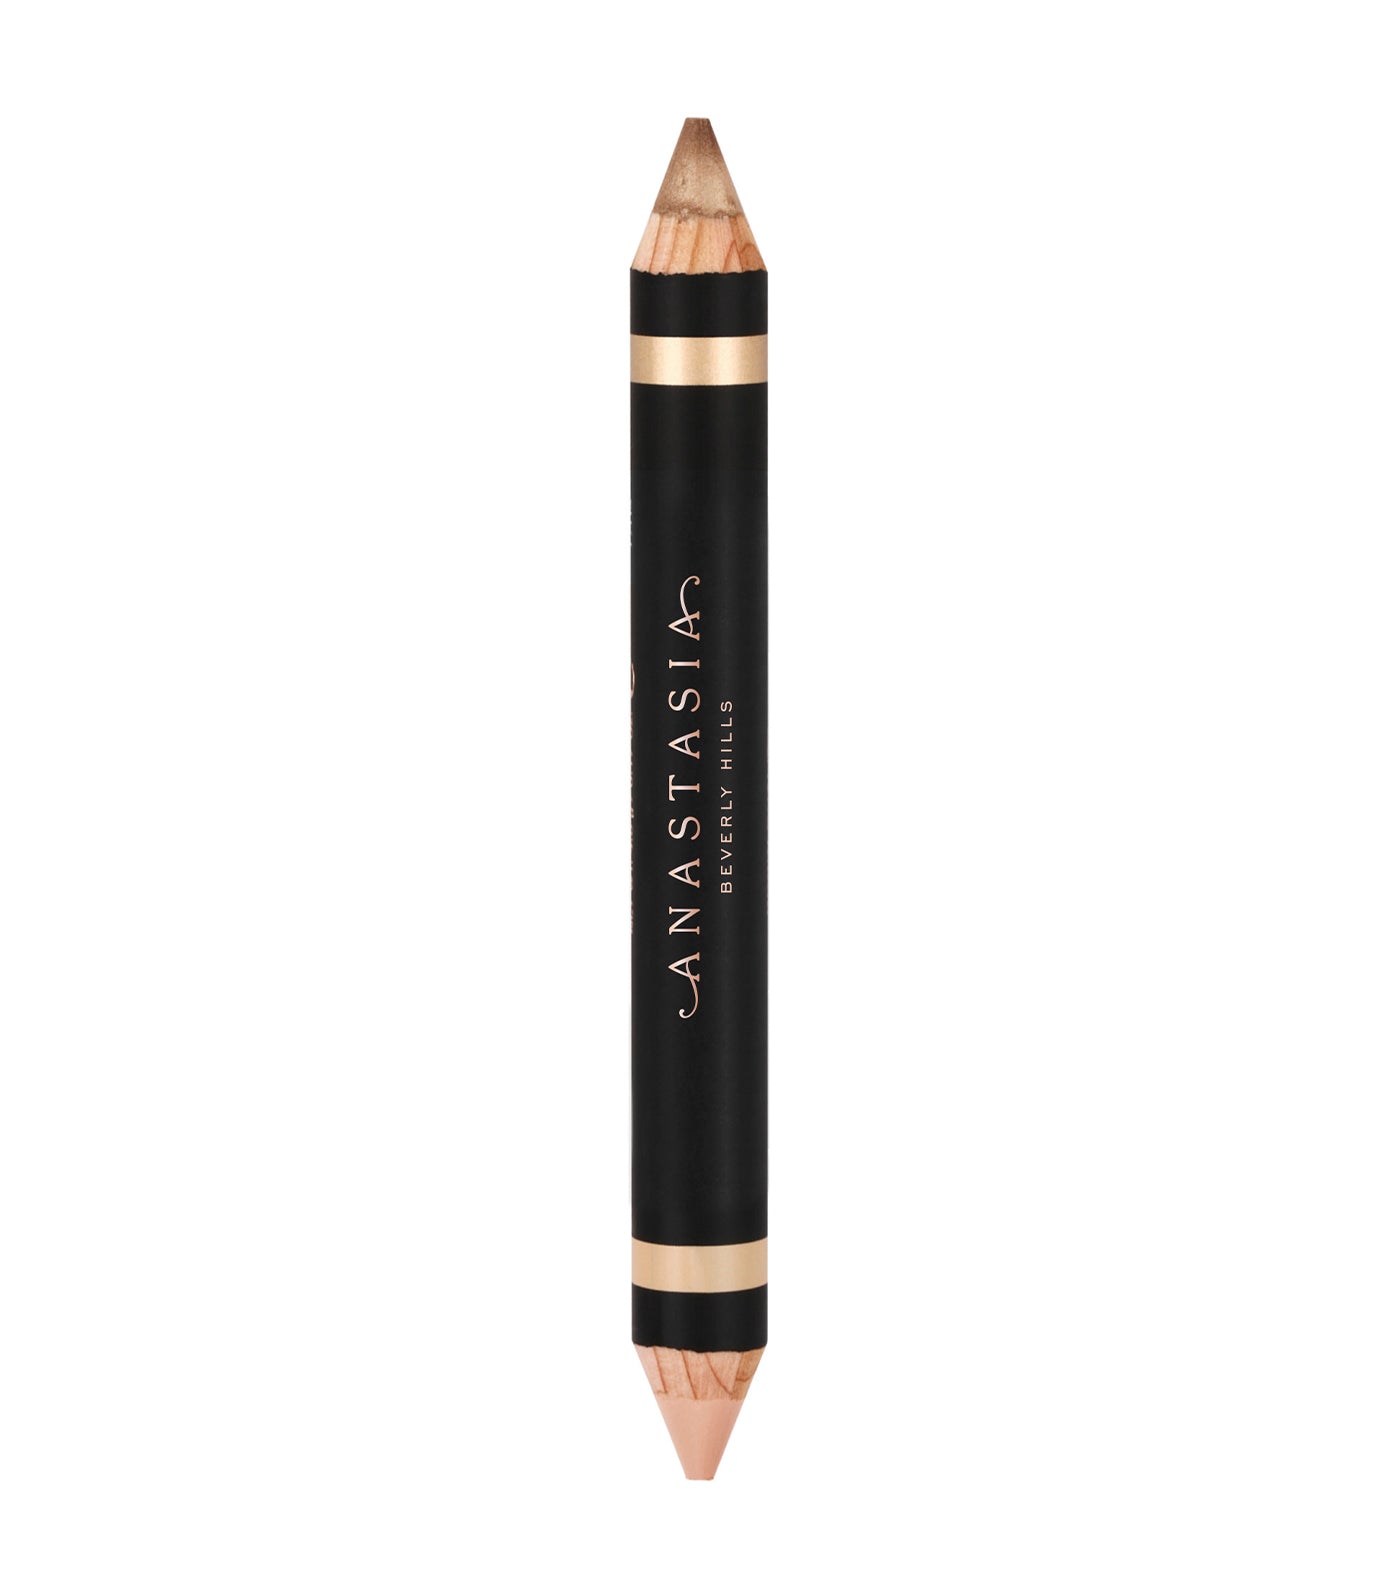 anastasia beverly hills shell/lace shimmer highlighting duo pencil